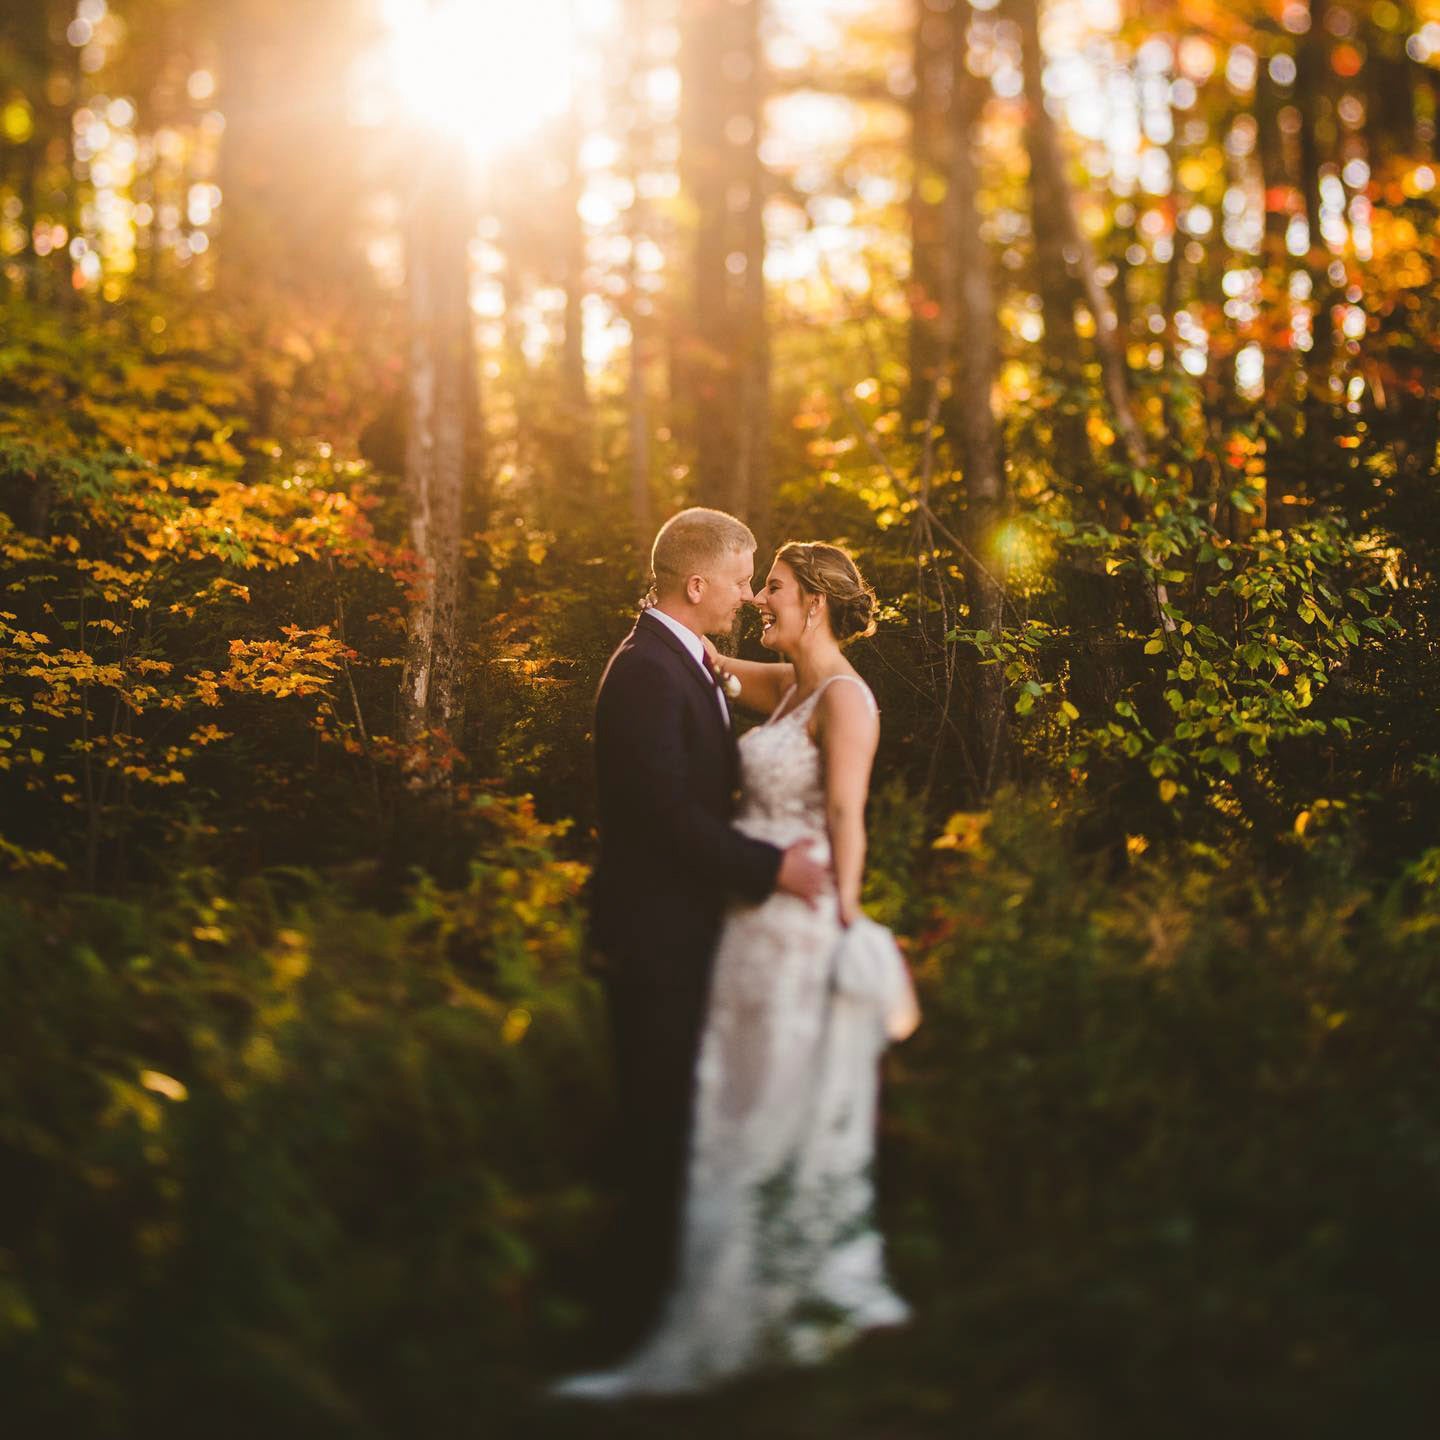 a couple standing in their wedding attire holding each other amidst lush greenery